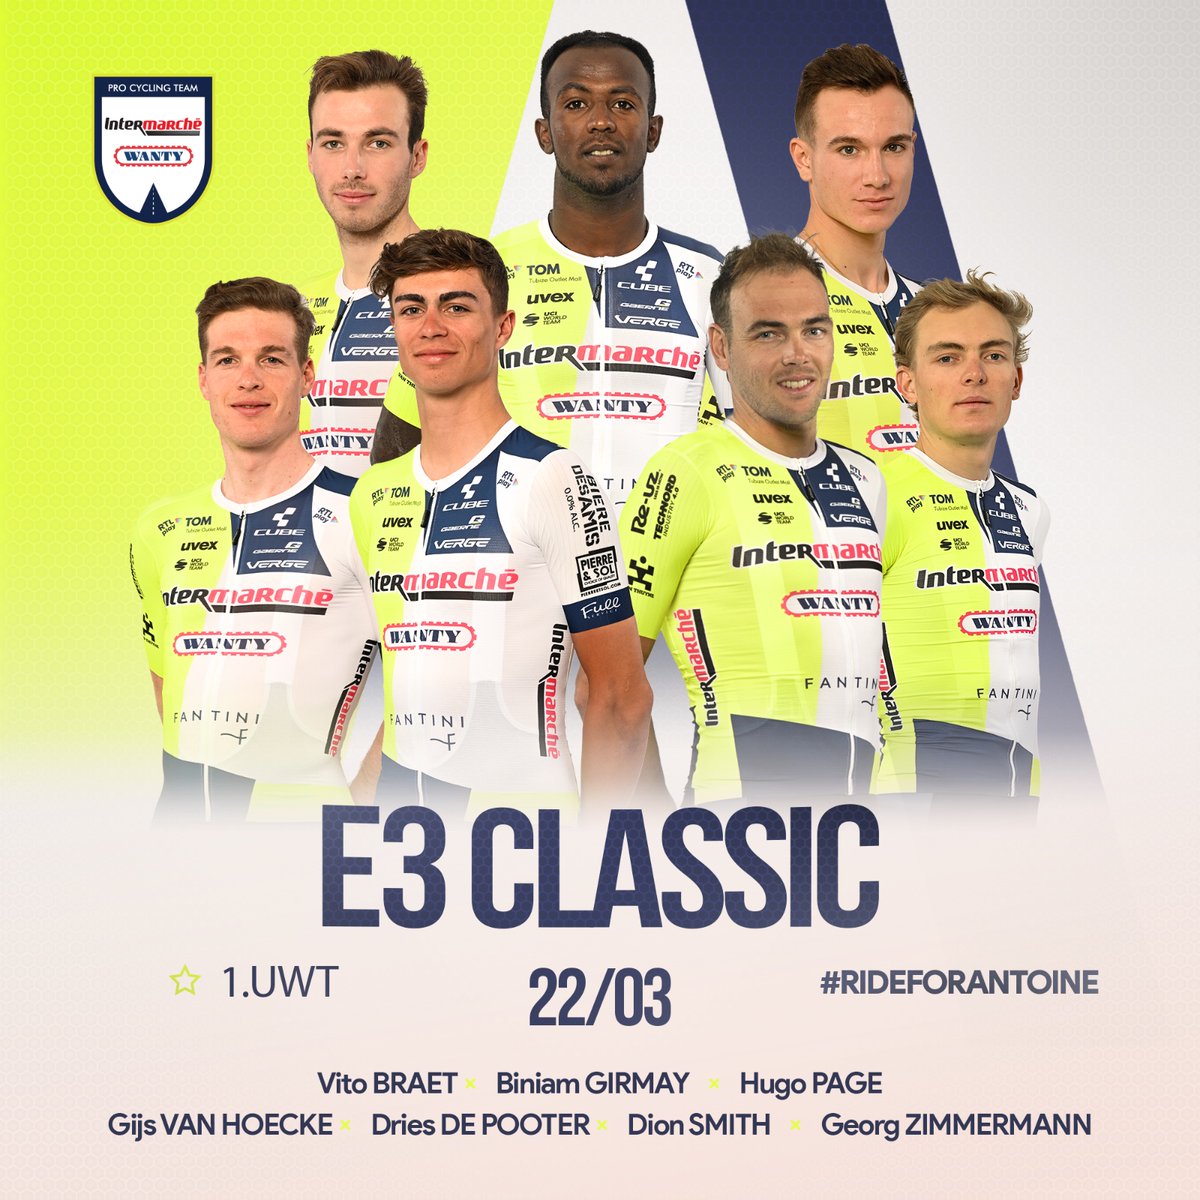 Ready to battle in the heart of Flanders ⚔️ #E3SaxoClassic 🇧🇪 Vito Braet 🇧🇪 Dries De Pooter 🇪🇷 Biniam Girmay 🇫🇷 Hugo Page 🇳🇿 Dion Smith 🇧🇪 Gijs Van Hoecke 🇩🇪 Georg Zimmermann